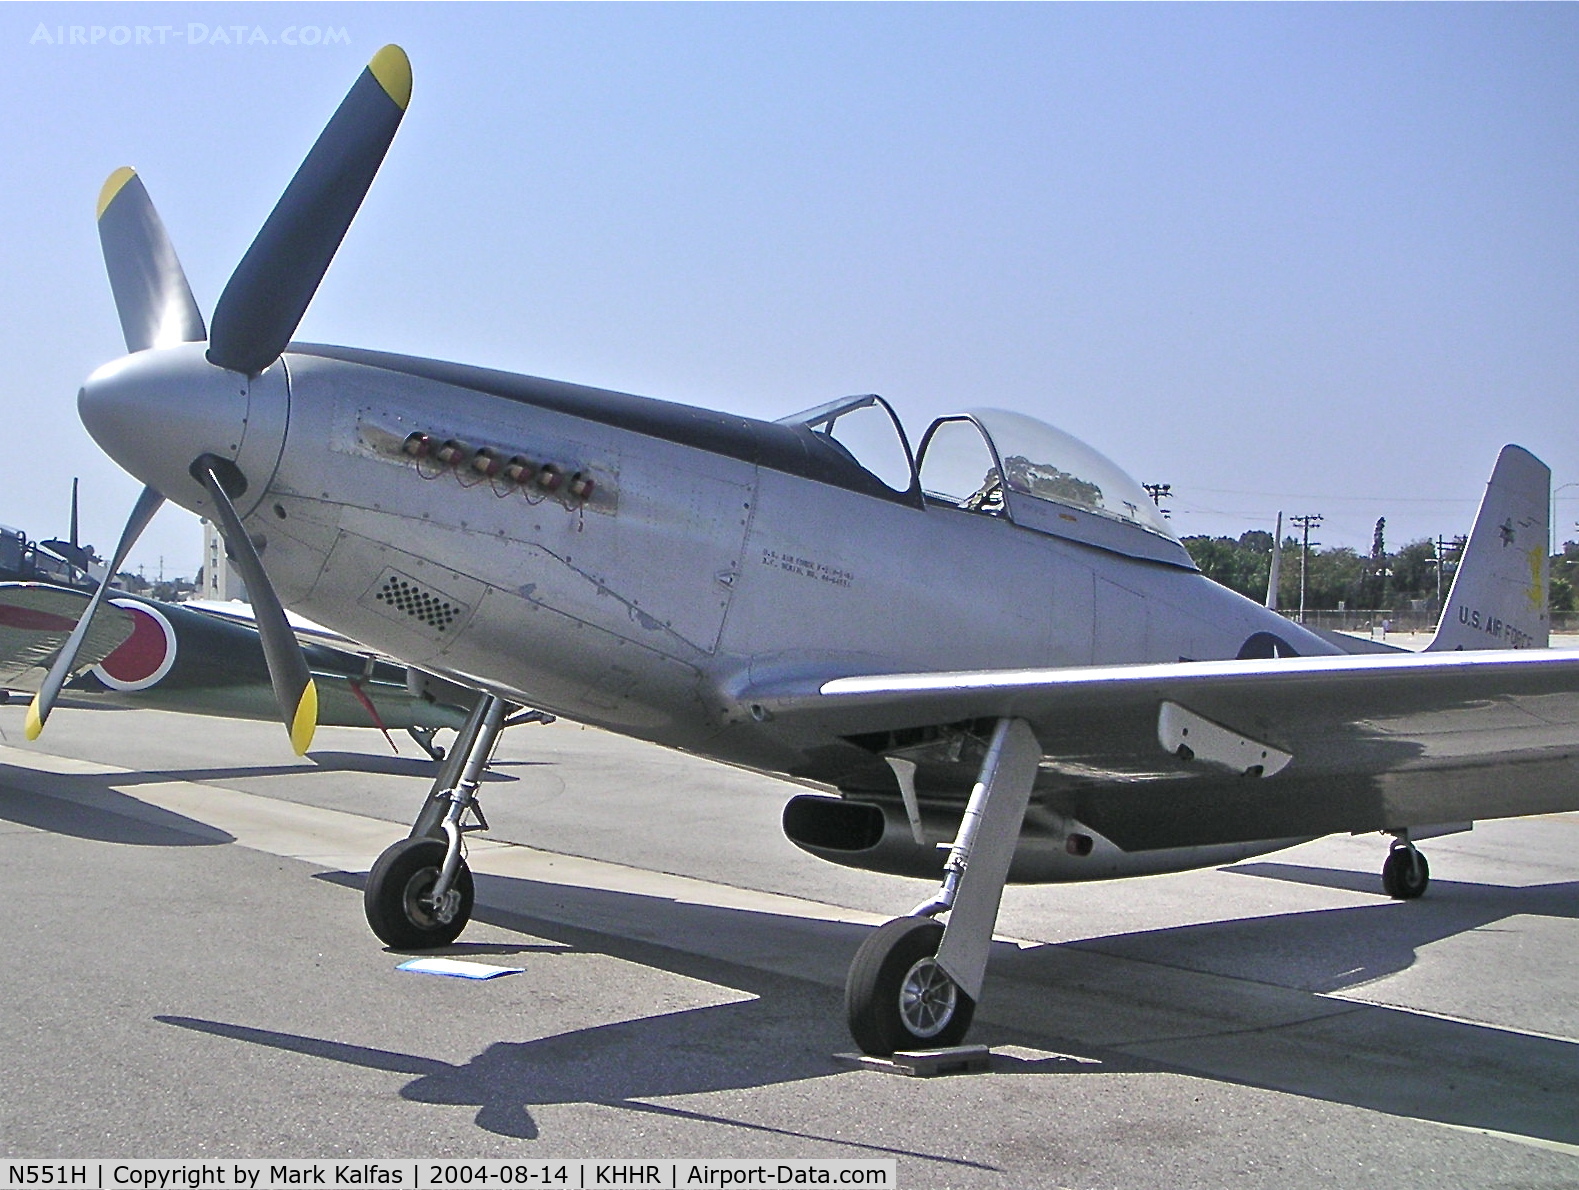 N551H, 1944 North American F-51-H-5-NA C/N 44-64314, A very rare North American P-51H Mustang, N551H on the ramp at the 2004 Air Faire KHHR.